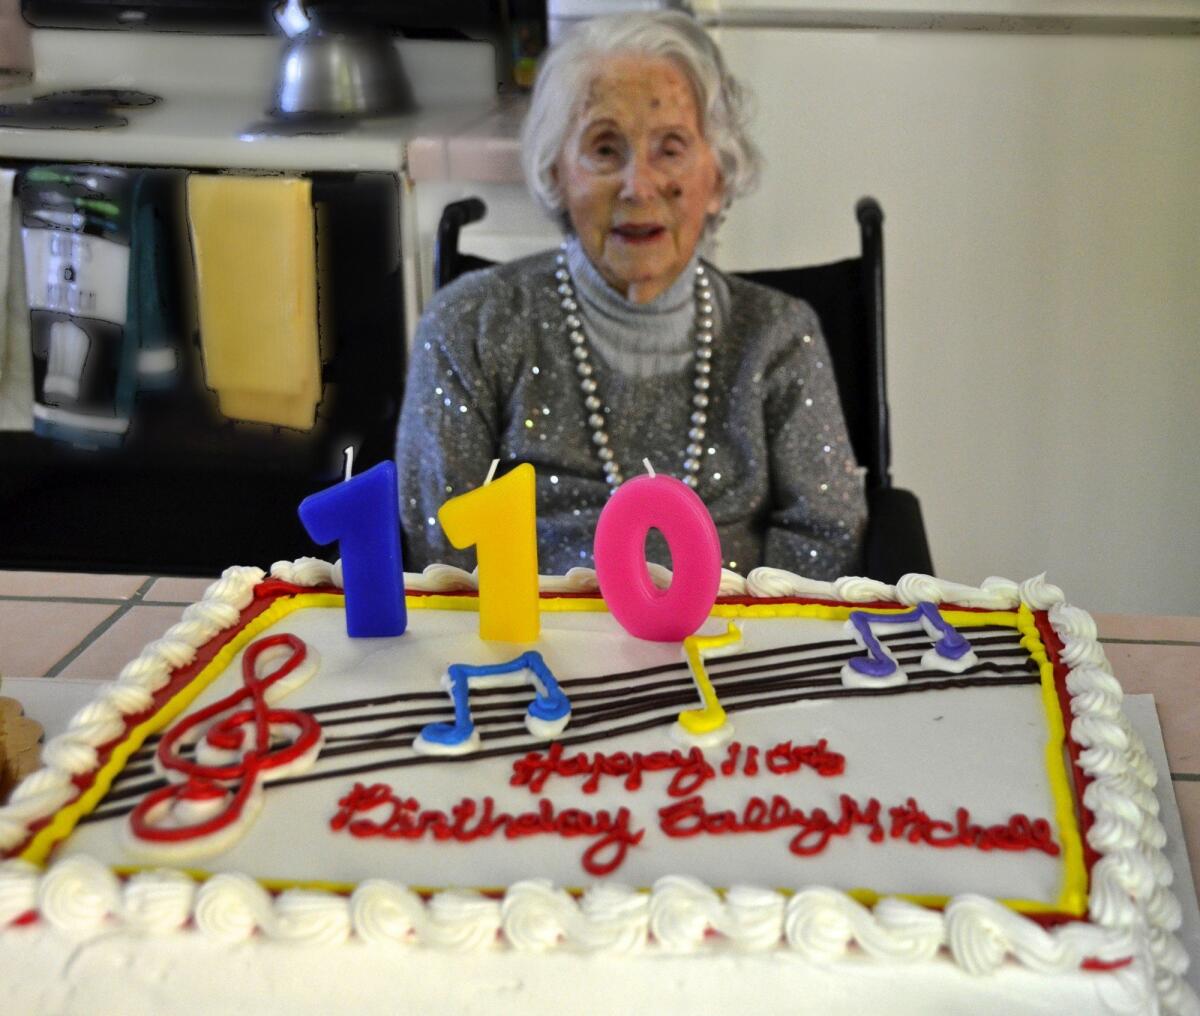 On her 110th birthday. (Source: Los Angeles Times)